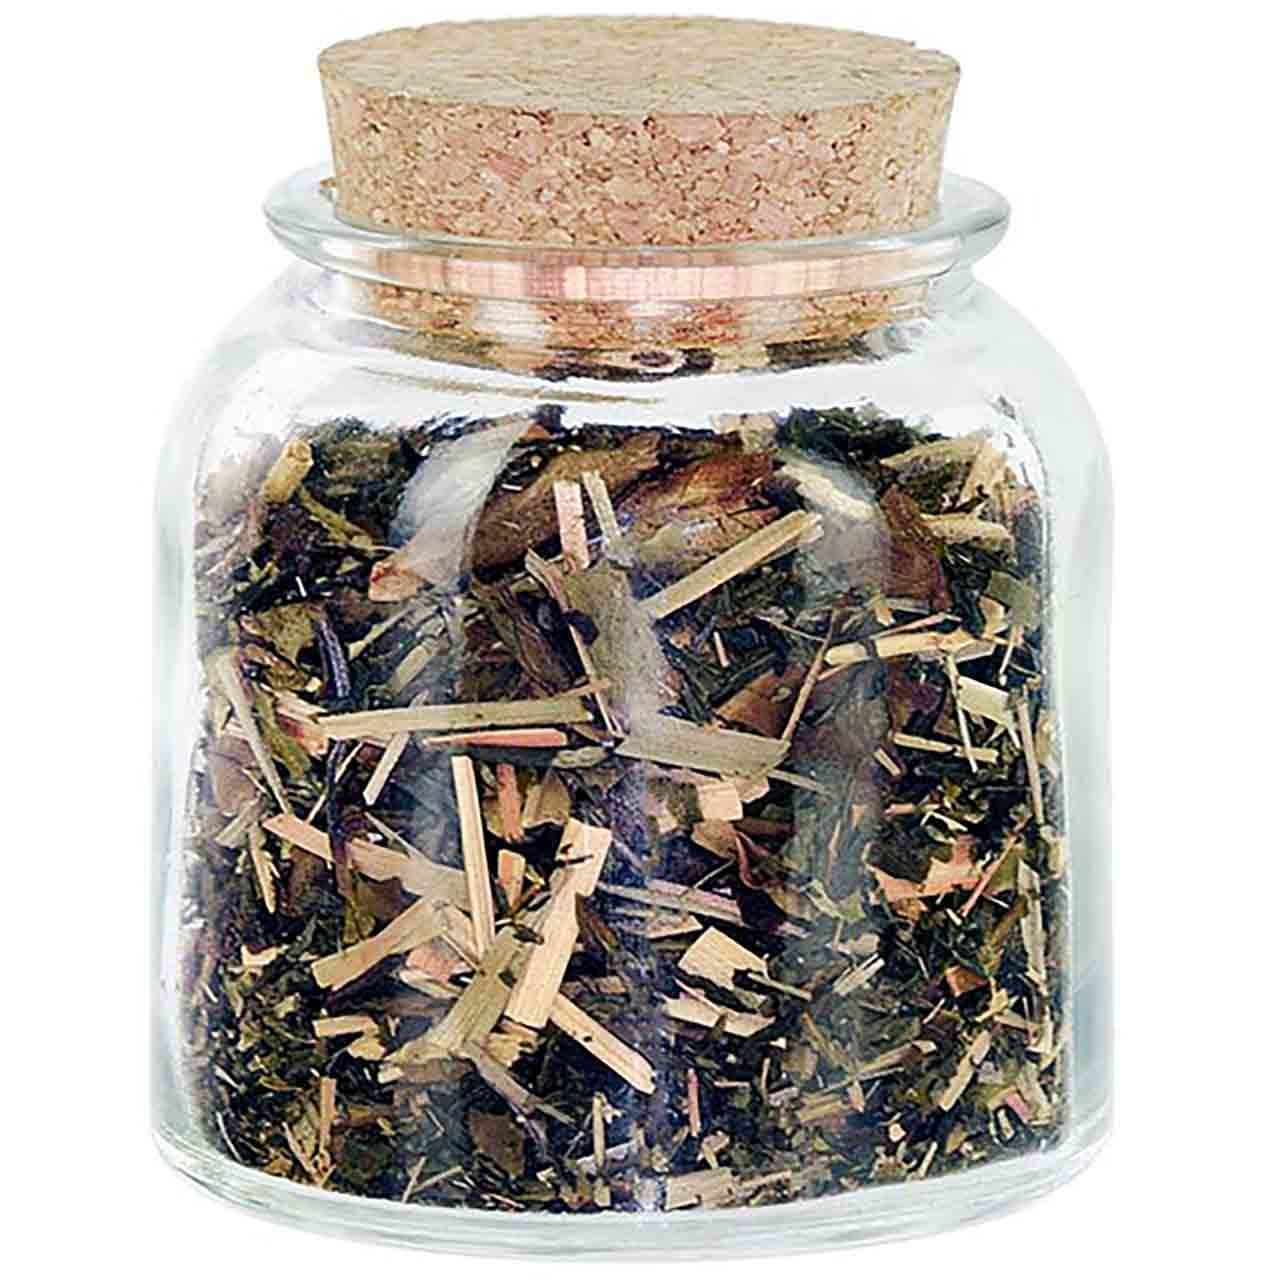 8oz Apothecary Jar Recycled Glass with Cork